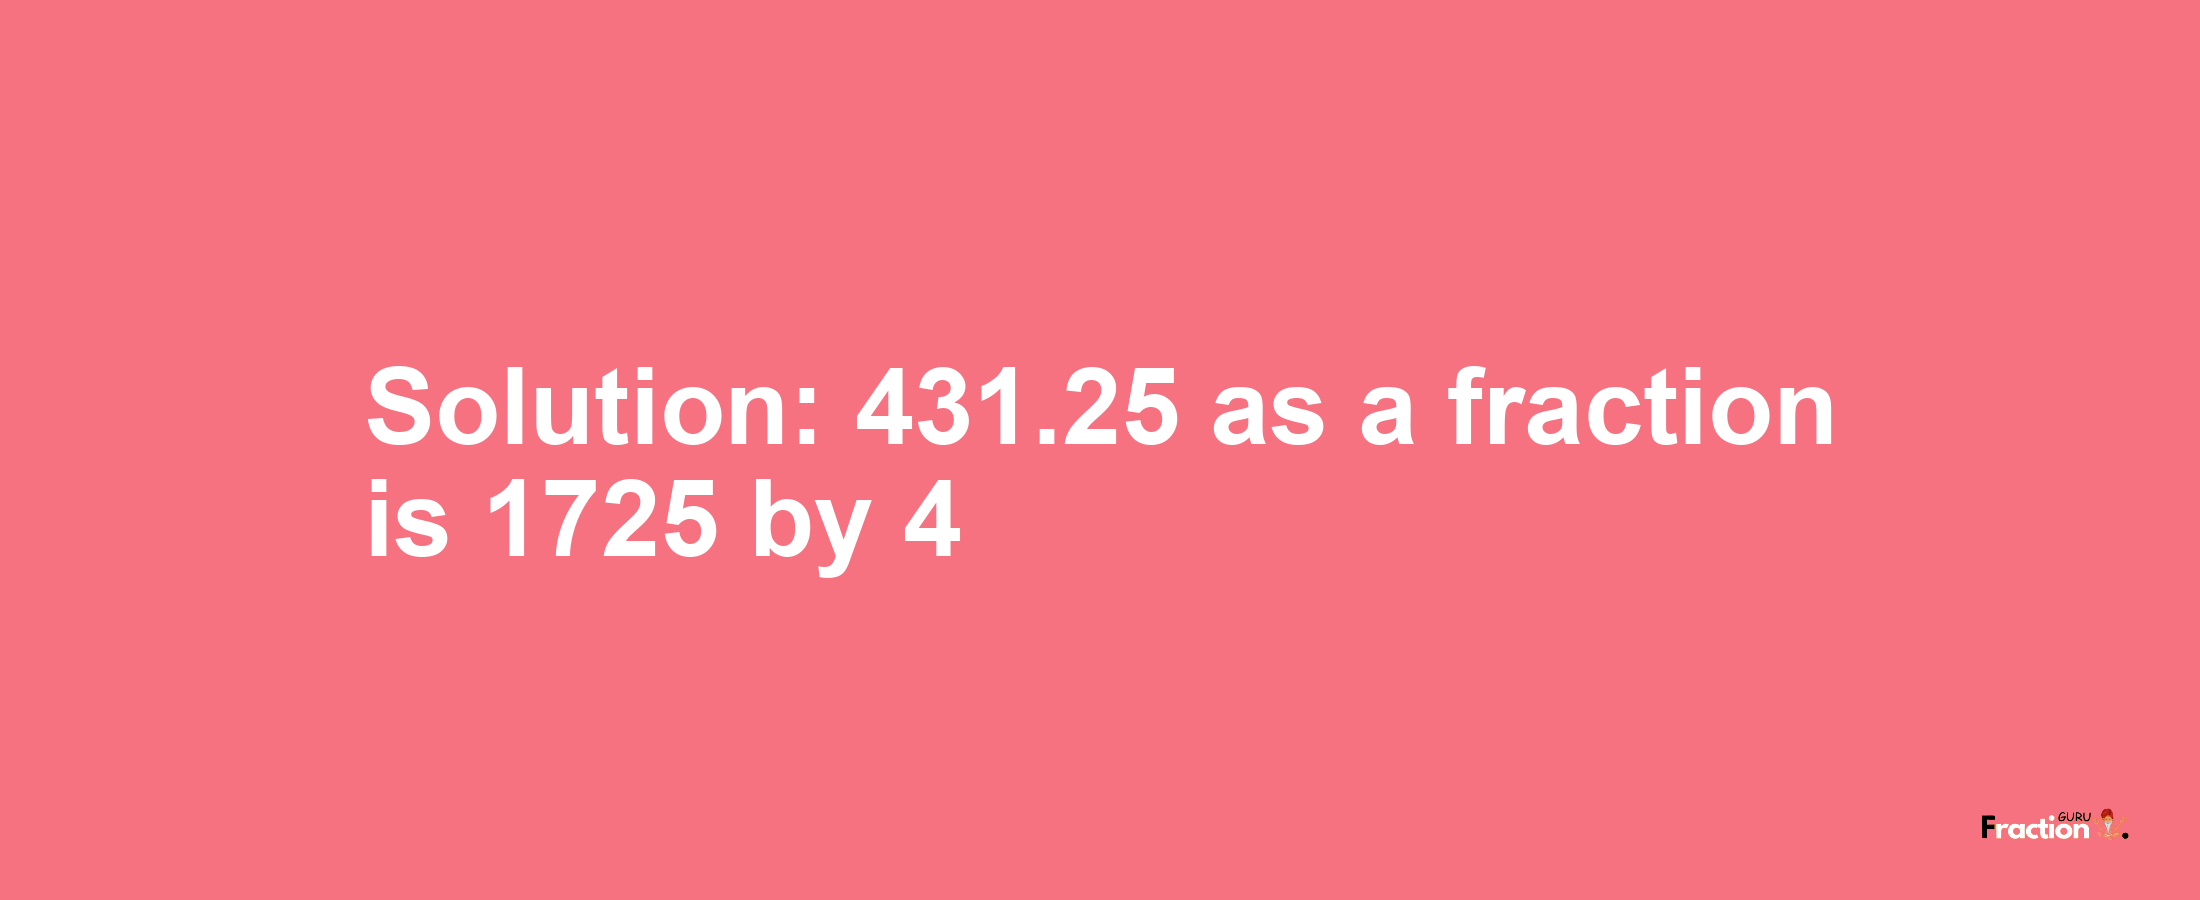 Solution:431.25 as a fraction is 1725/4